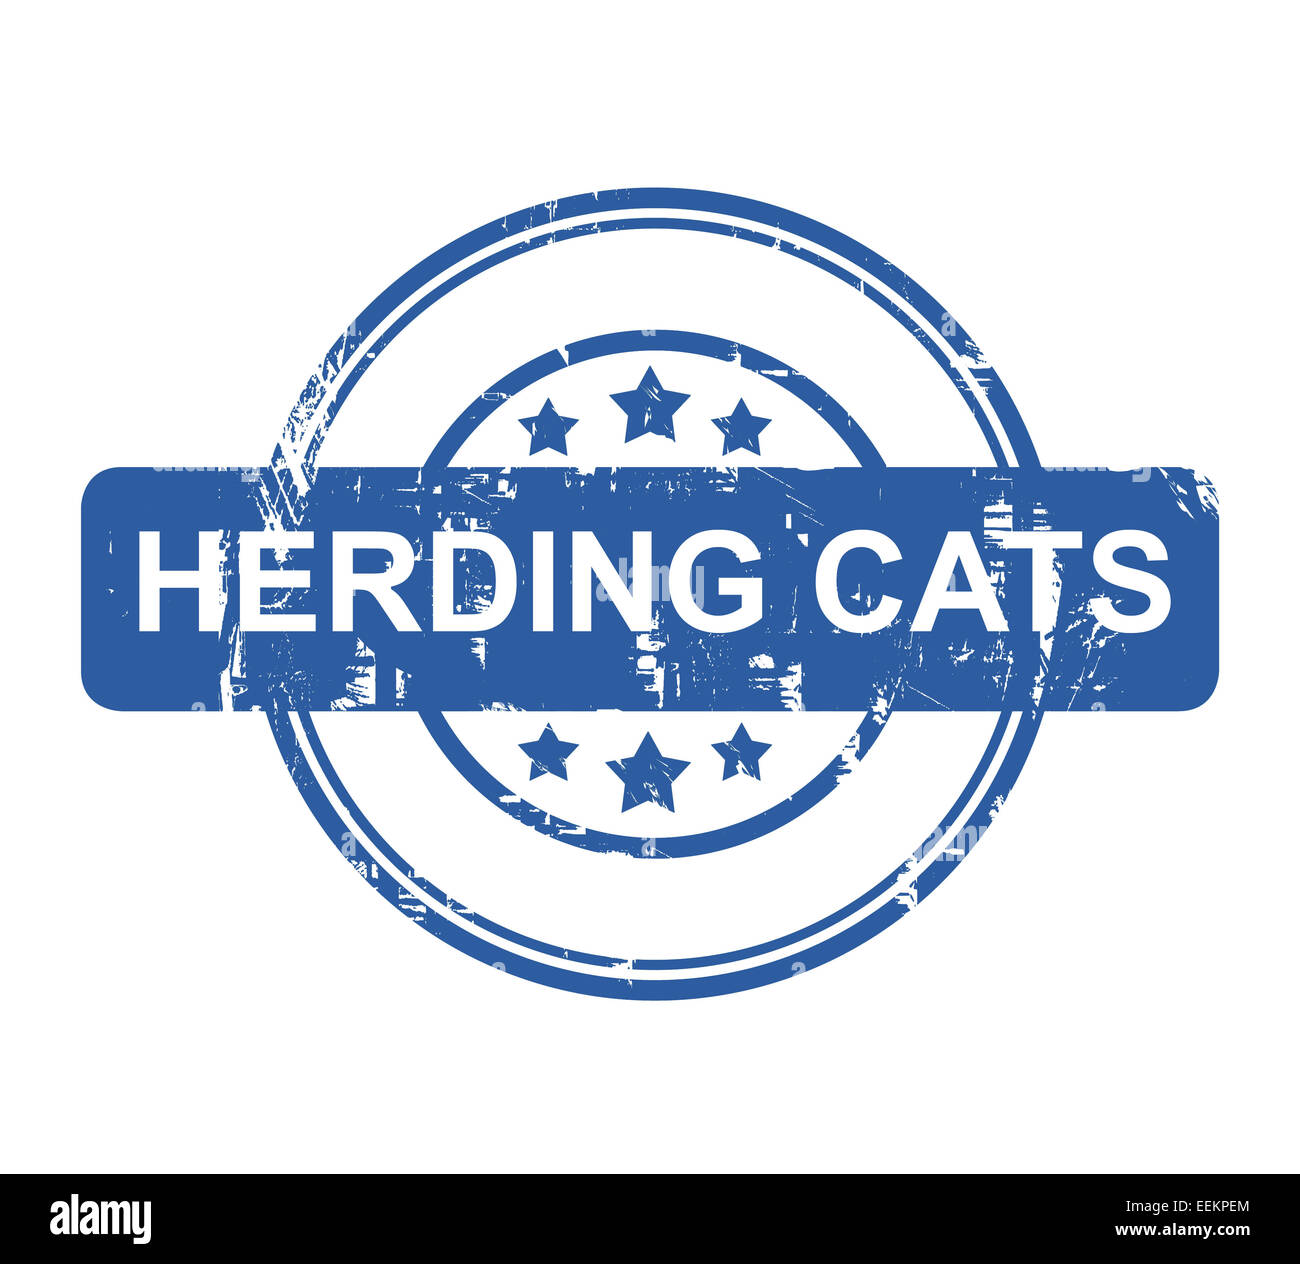 Herding Cats business concept stamp with stars isolated on a white background. Stock Photo